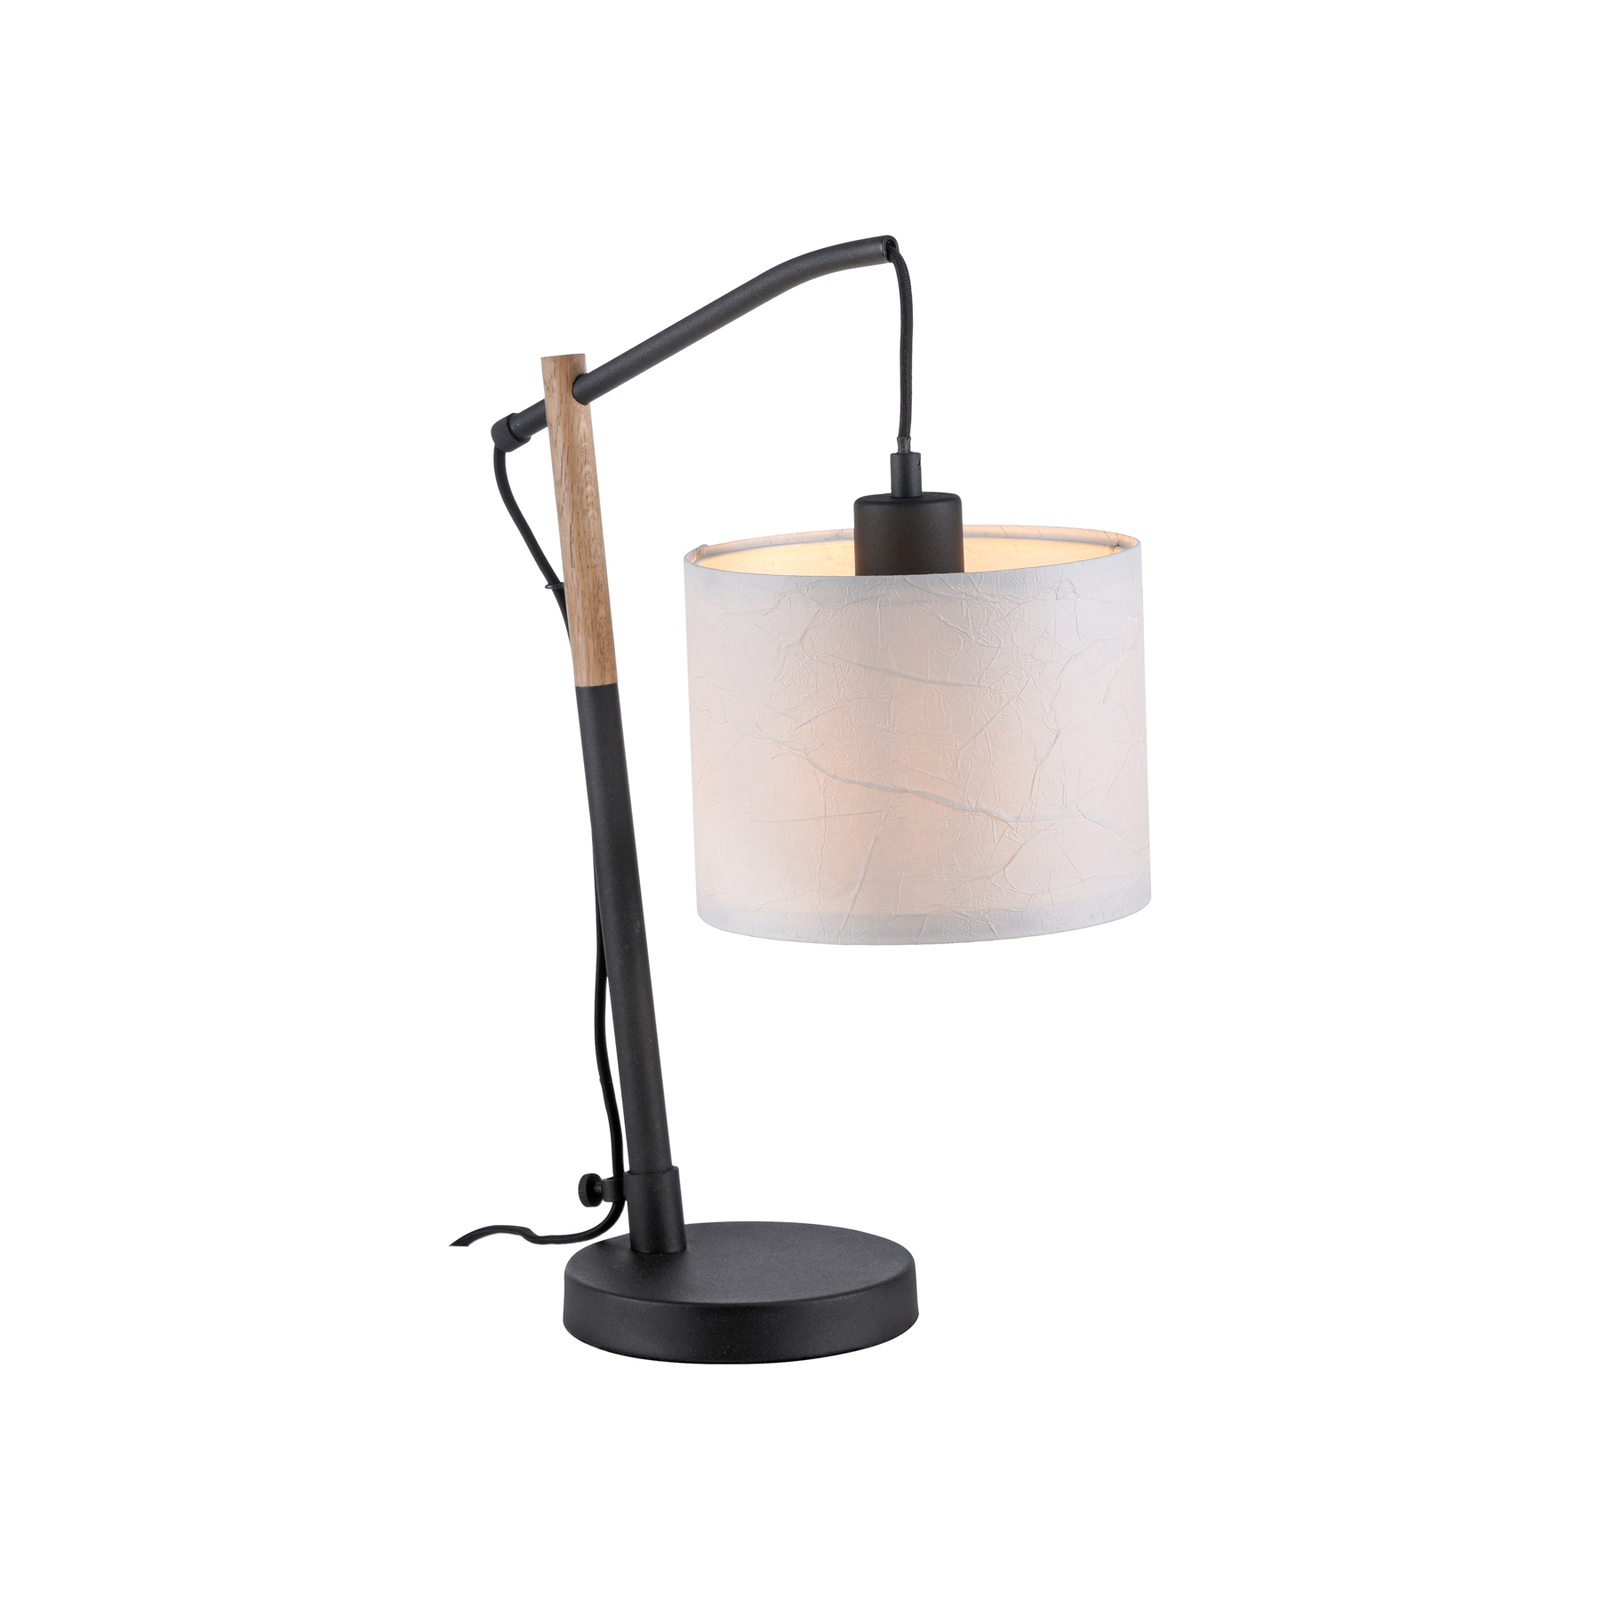 Green Sofie table lamp with paper shade